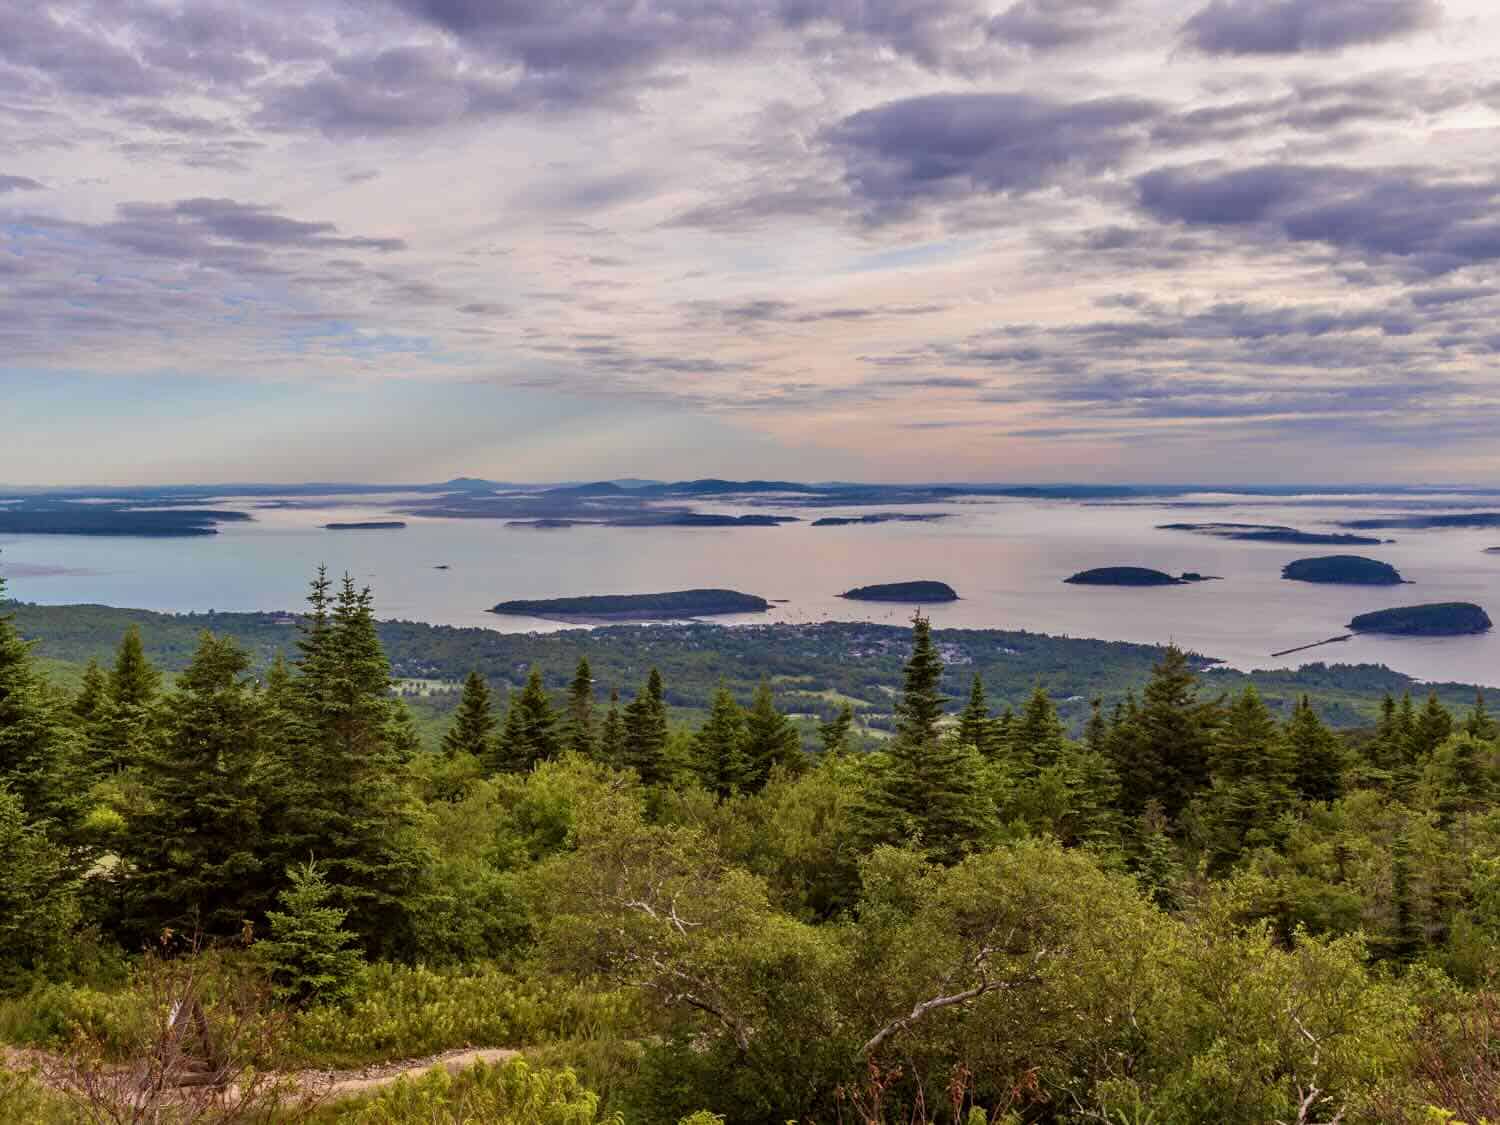 From the summit of Cadillac Mountain, you see evergreen trees on a hillside that slopes to the ocean with many small islets in the water.